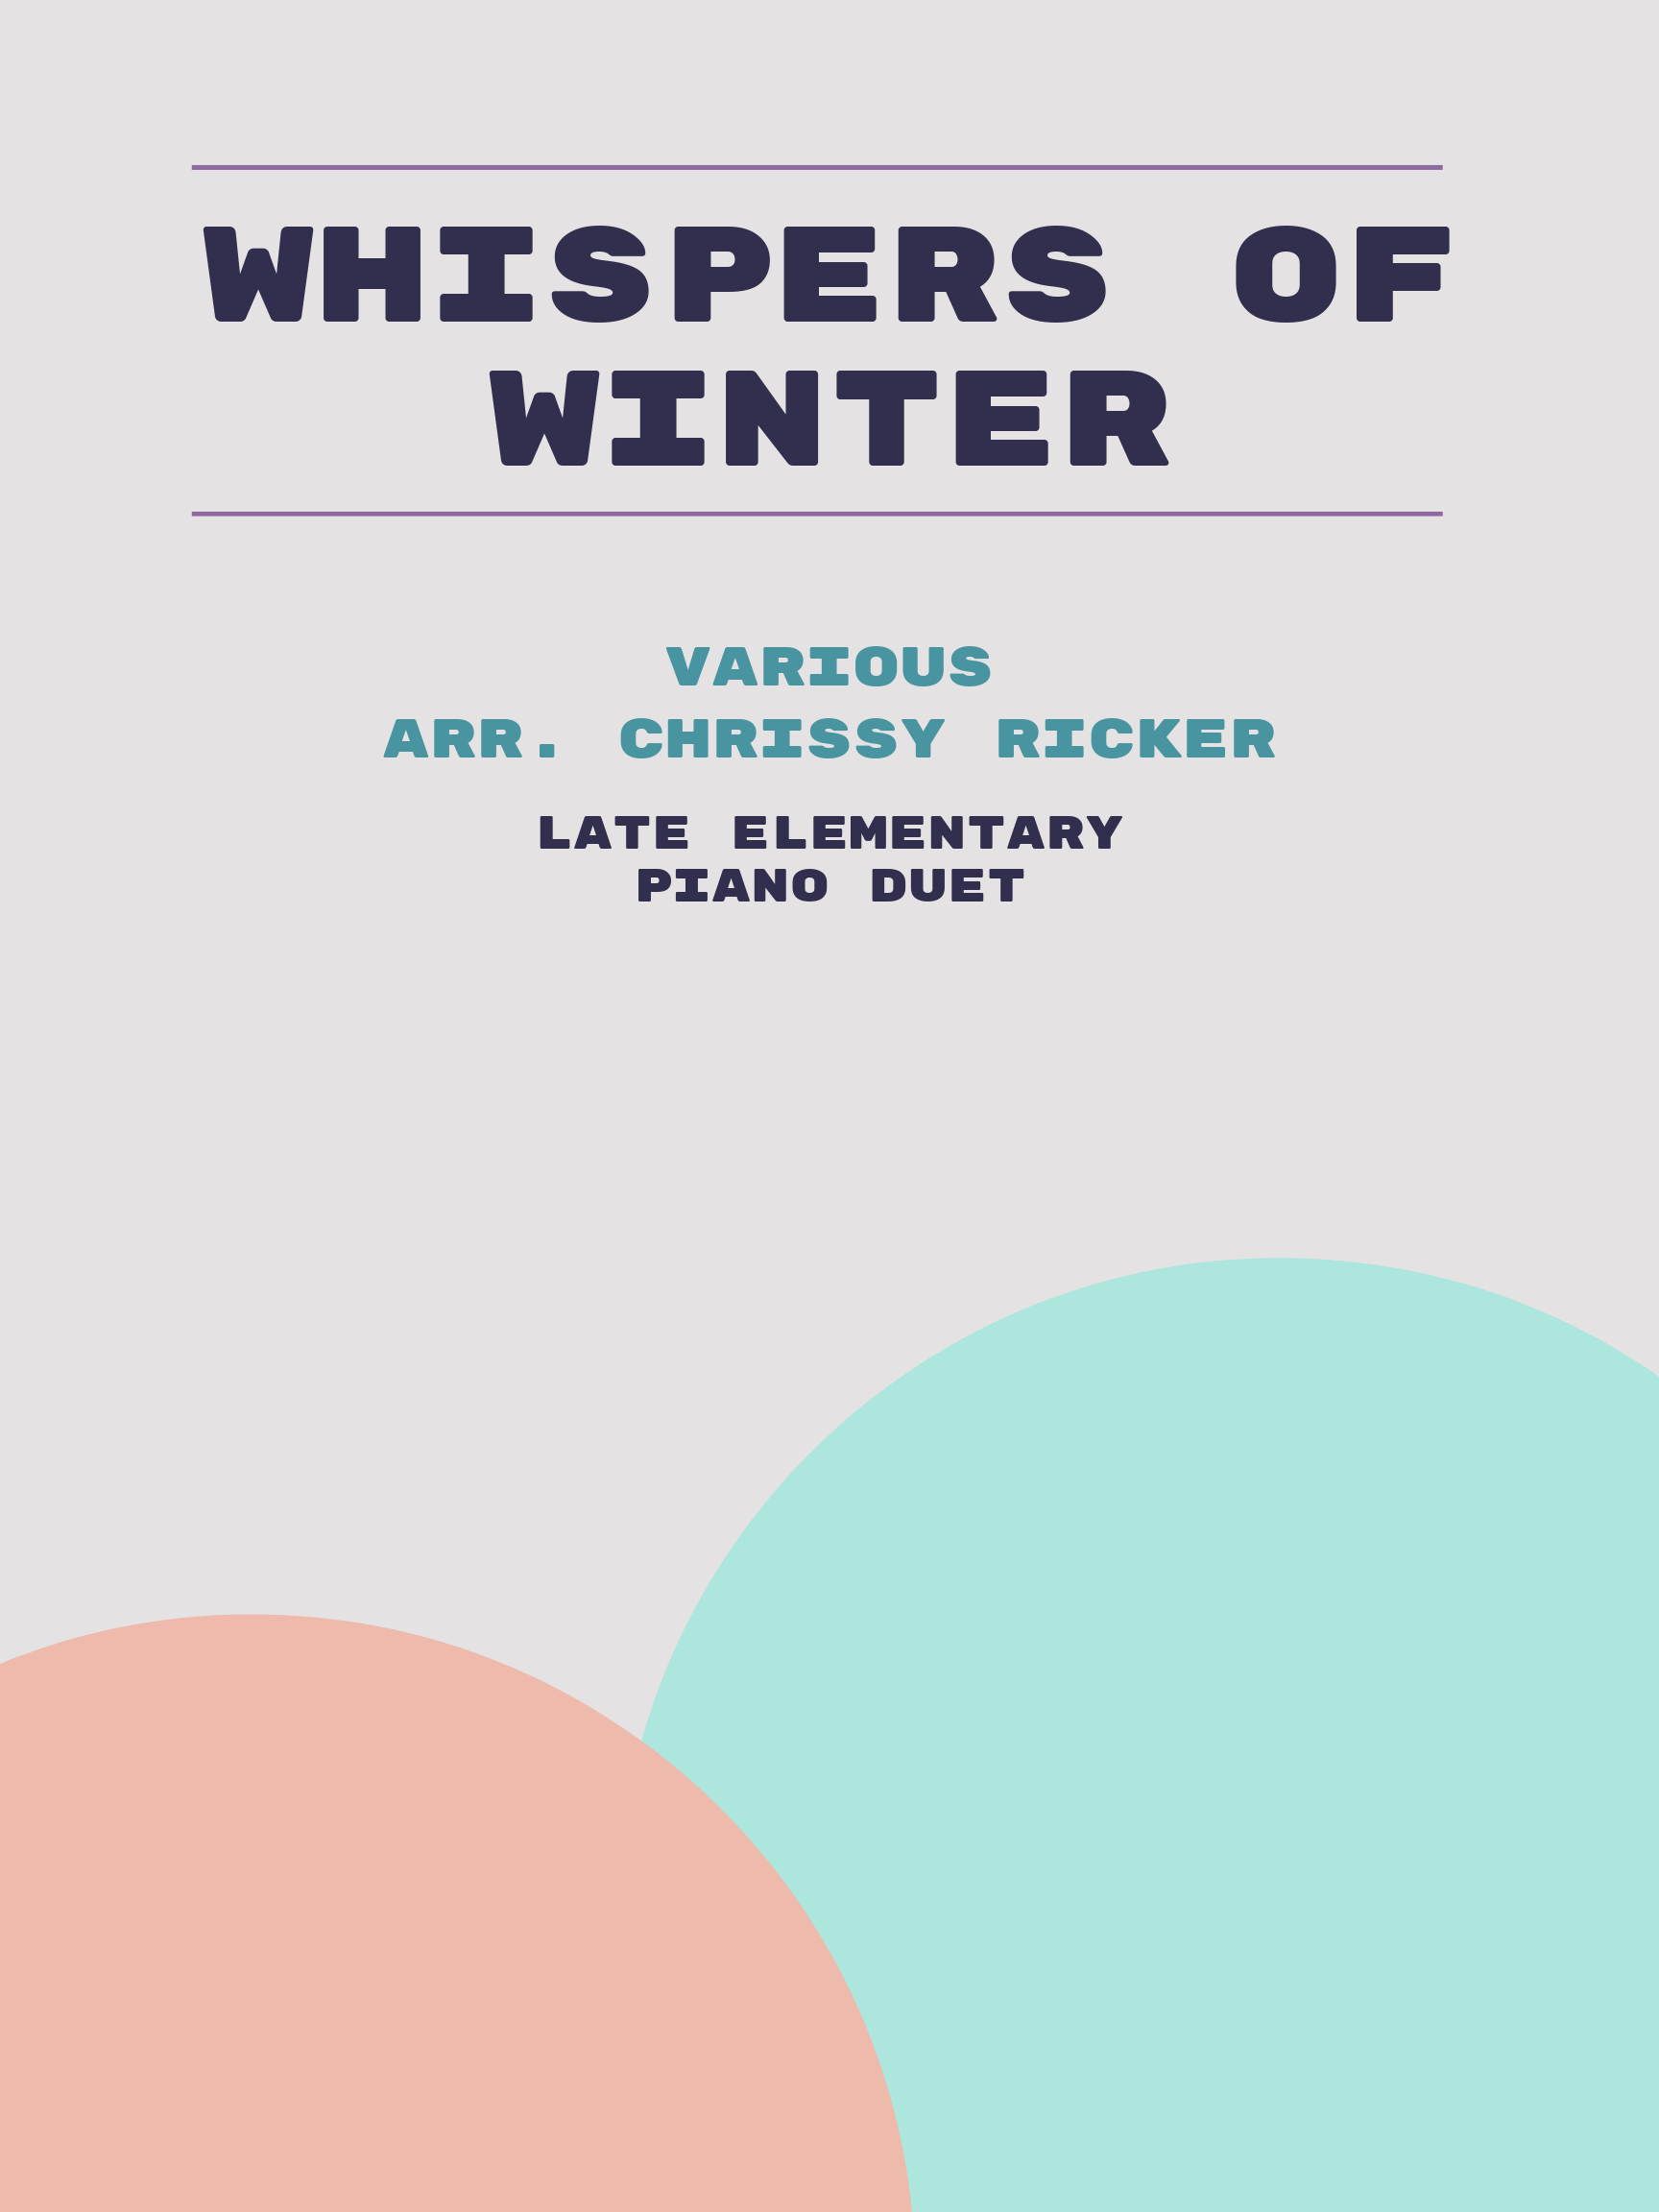 Whispers of Winter by Various